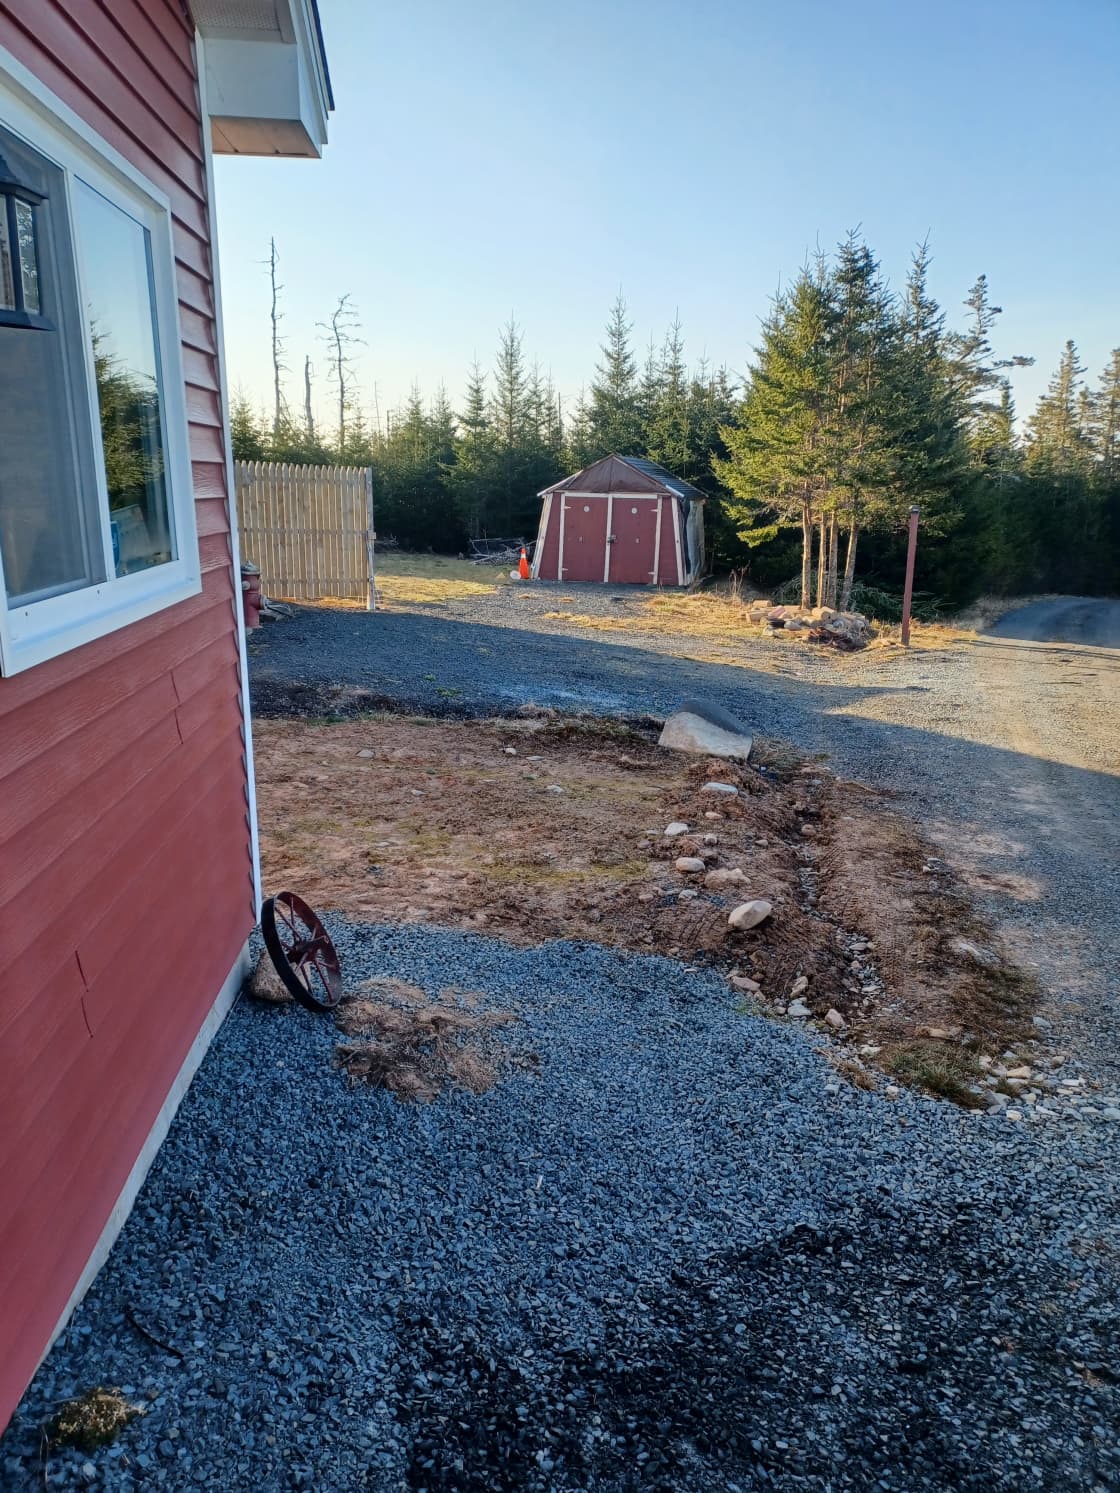 If you have a RV, it can fit right up against the red shed where the orange cone is located in this pic.  The longest RV I've had in this spot was 33 foot, plus the truck. I do not recommend anything longer then 33 foot.  A long extension cord runs from the garage (which is to the left in this pic) to where the RV is parked